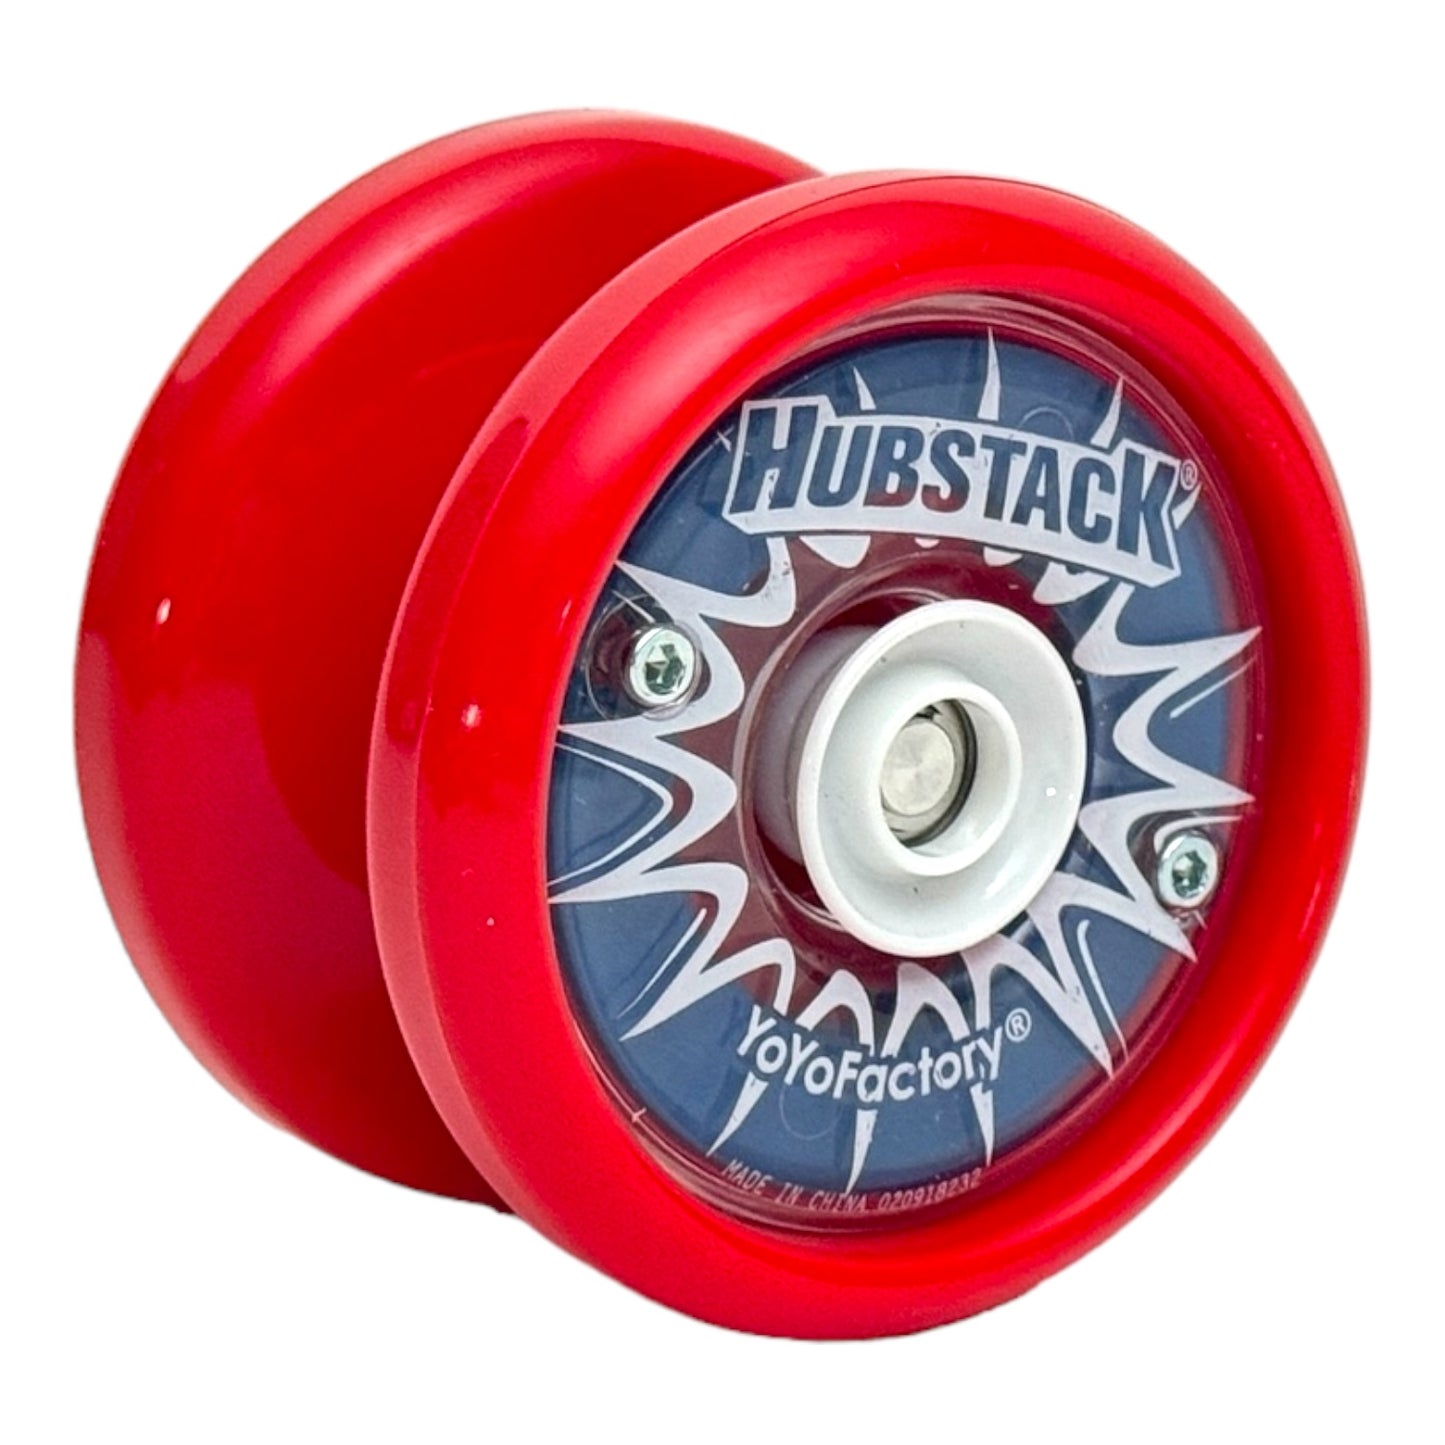 Hubstack yoyo red white and blue